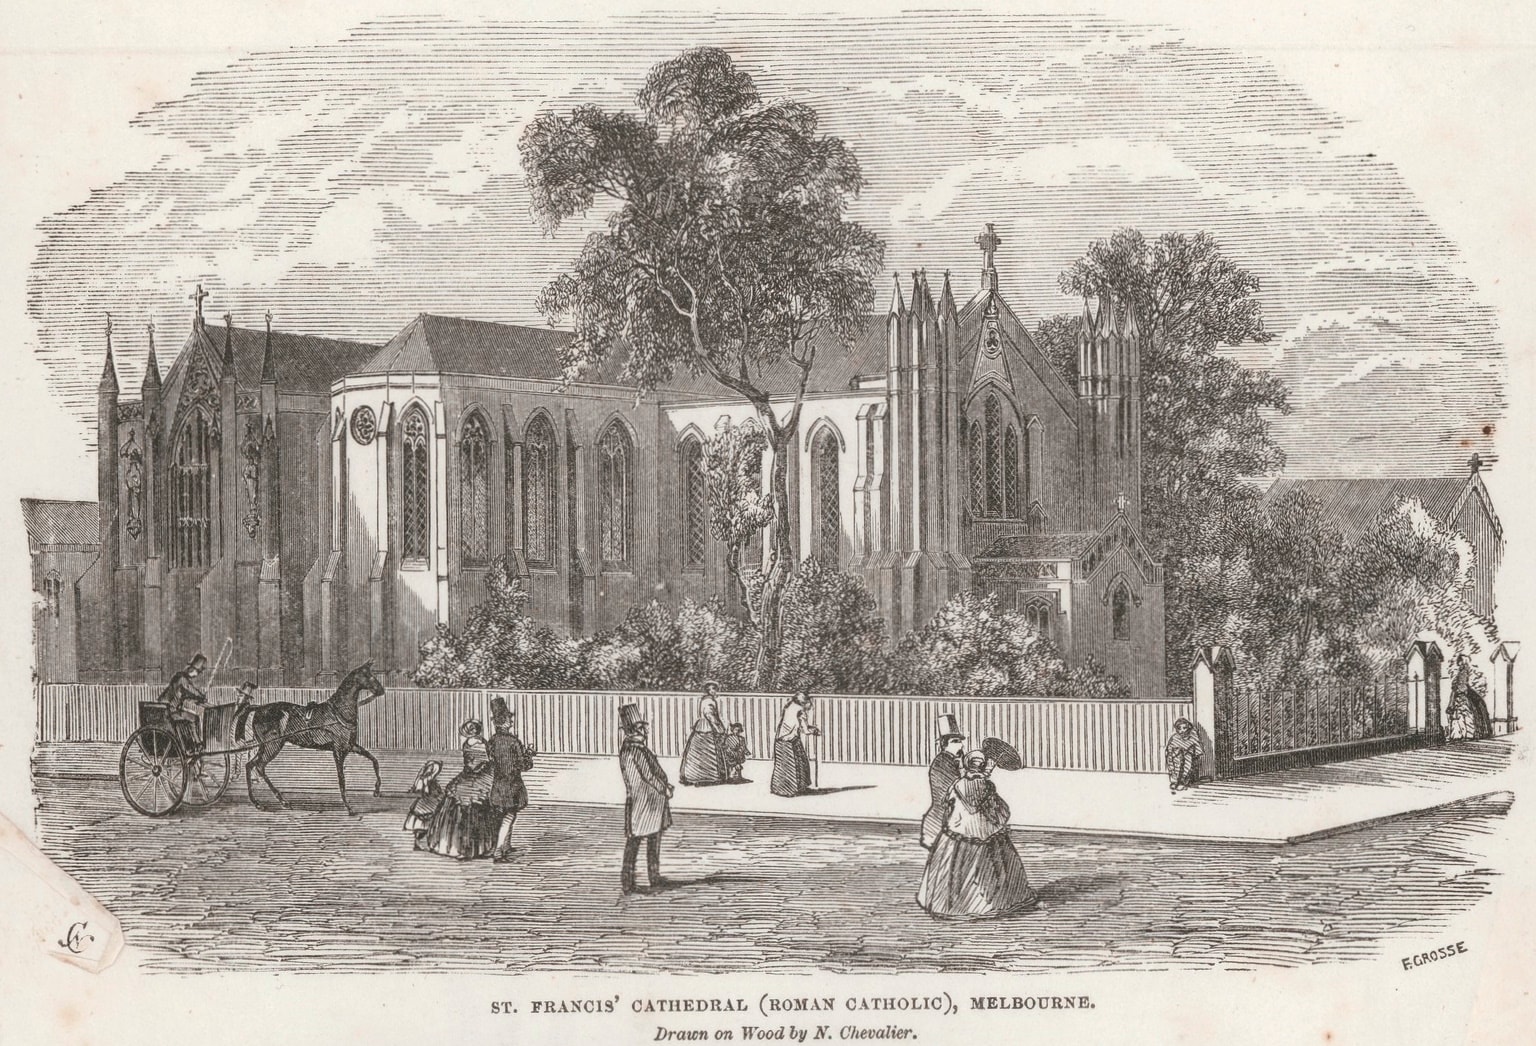 St. Francis's cathedral, Melbourne; drawn on wood by Nicholas Chevalier, engraved by Frederick Grosse, October 1857; State Library of Victoria